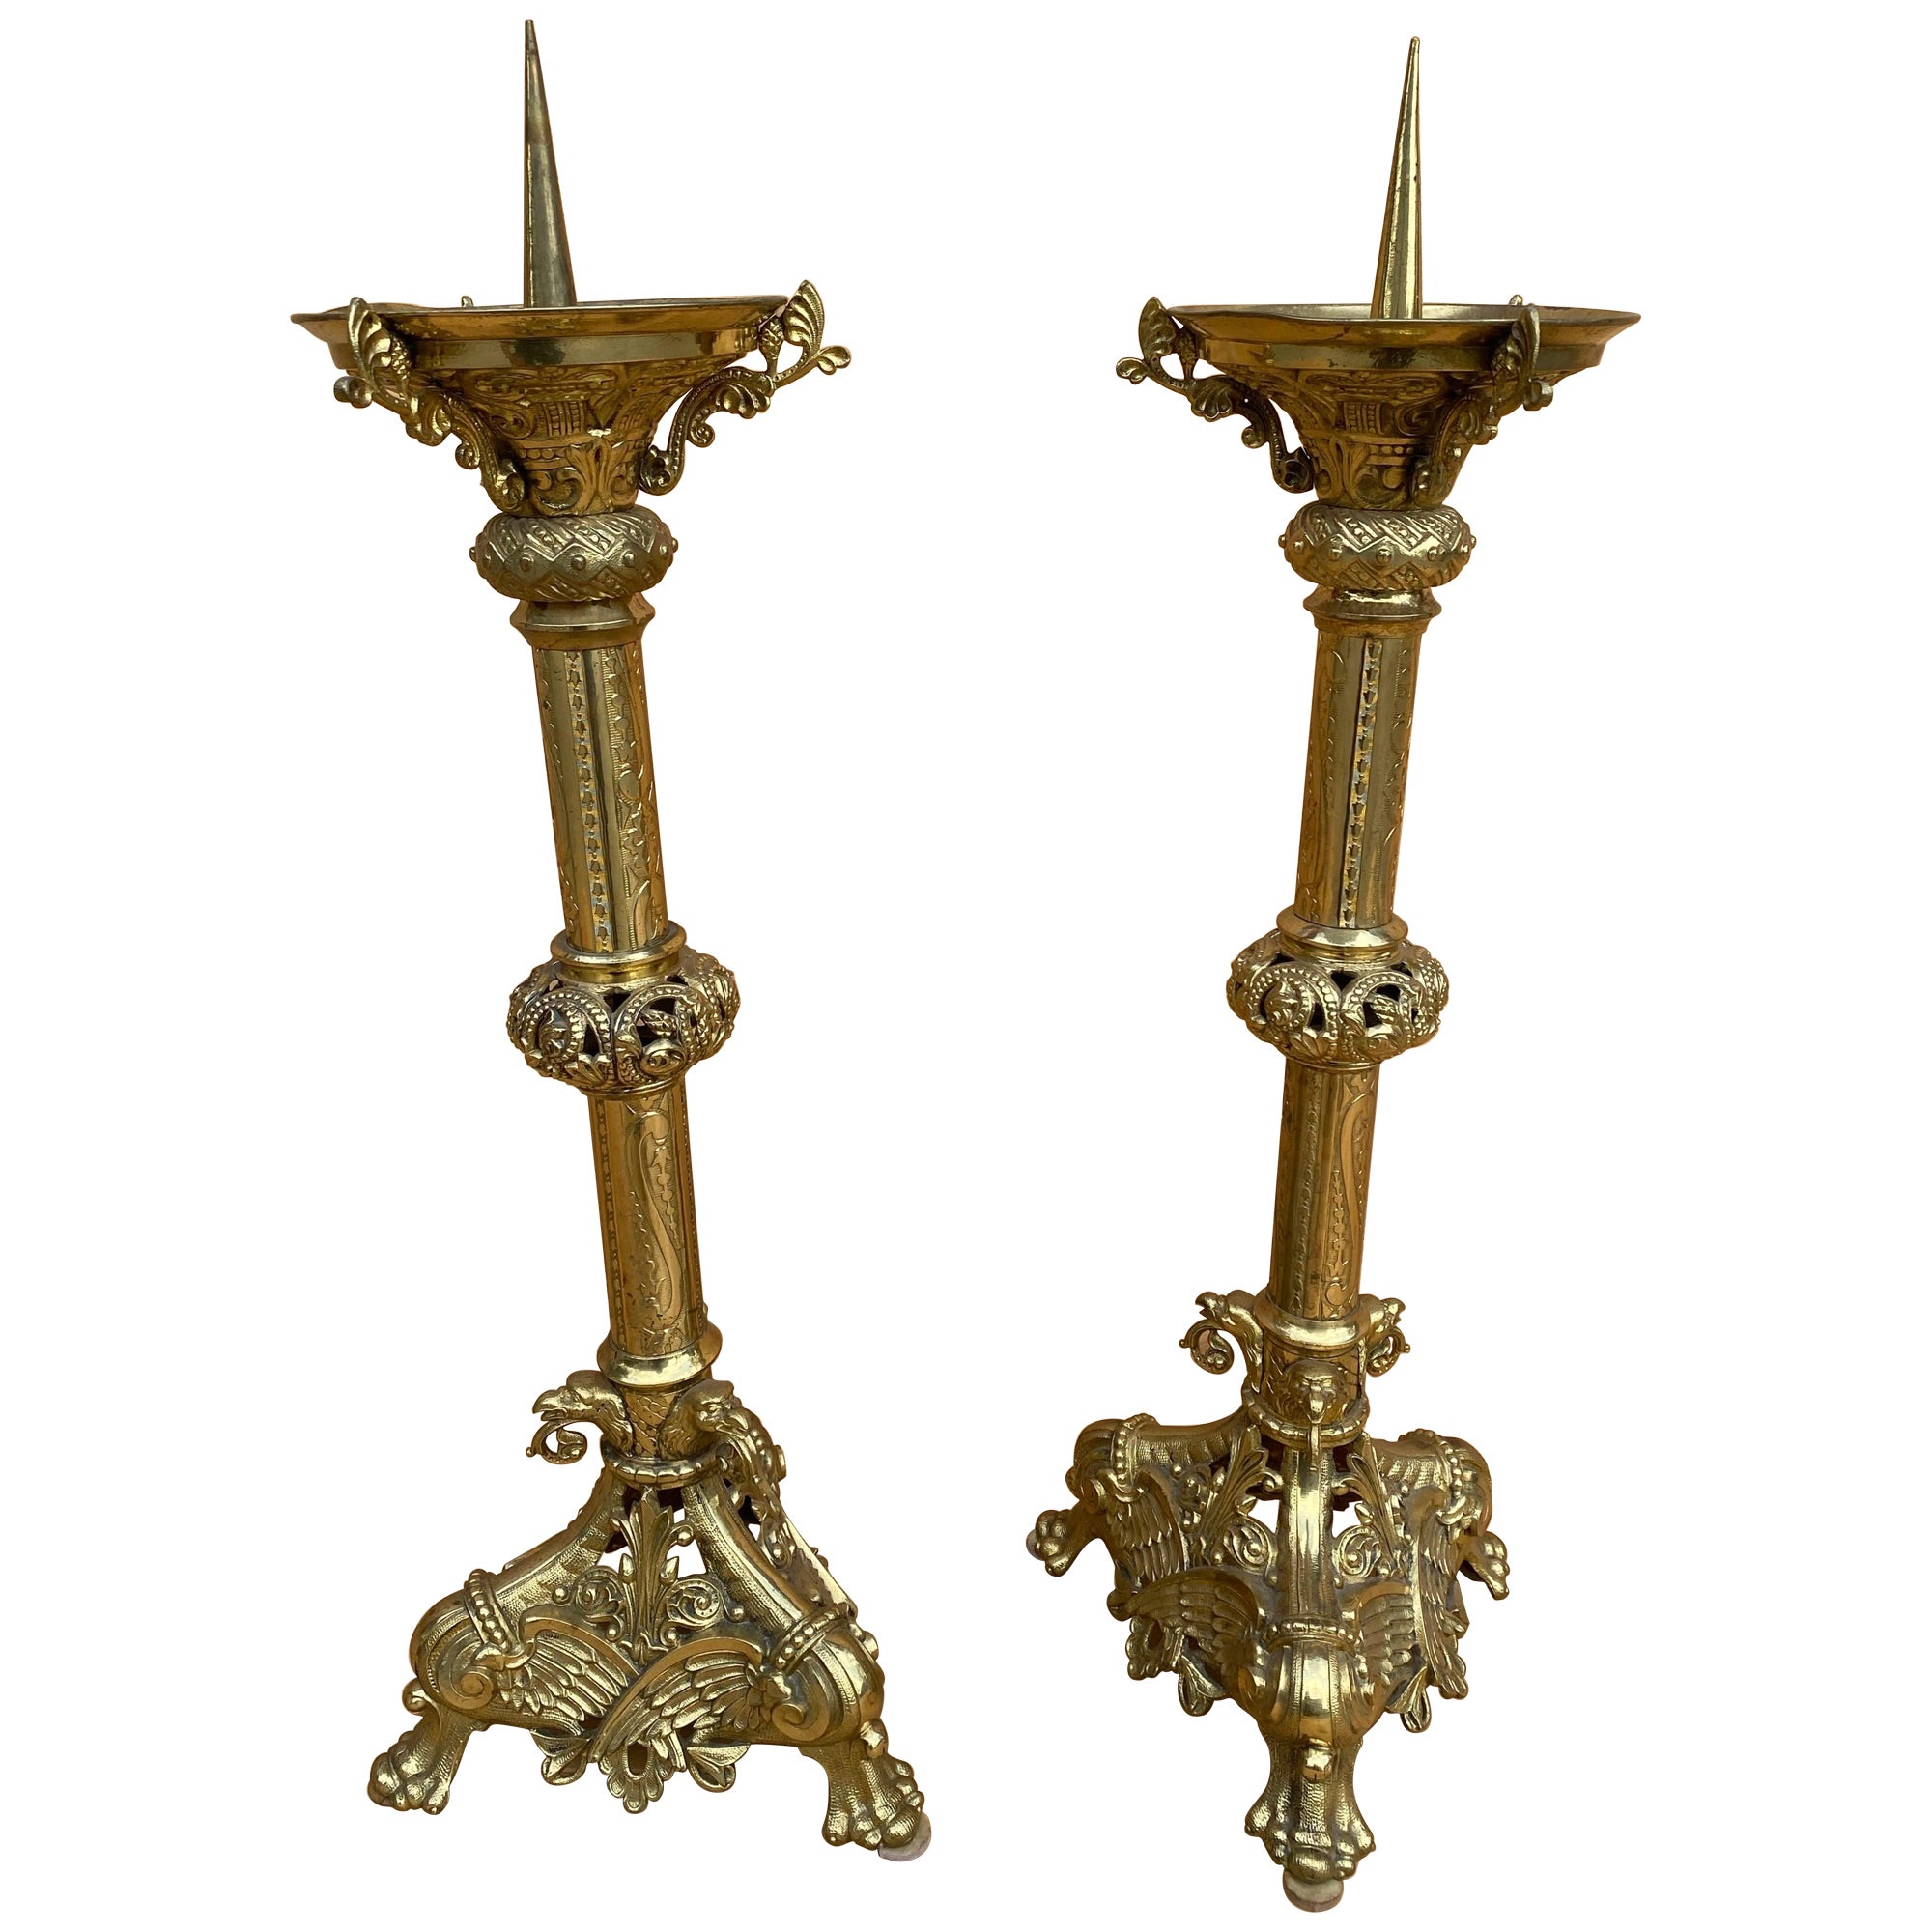 Antique French Neogothic Altar Torchère Candlestick Set w/ Griffins For Sale